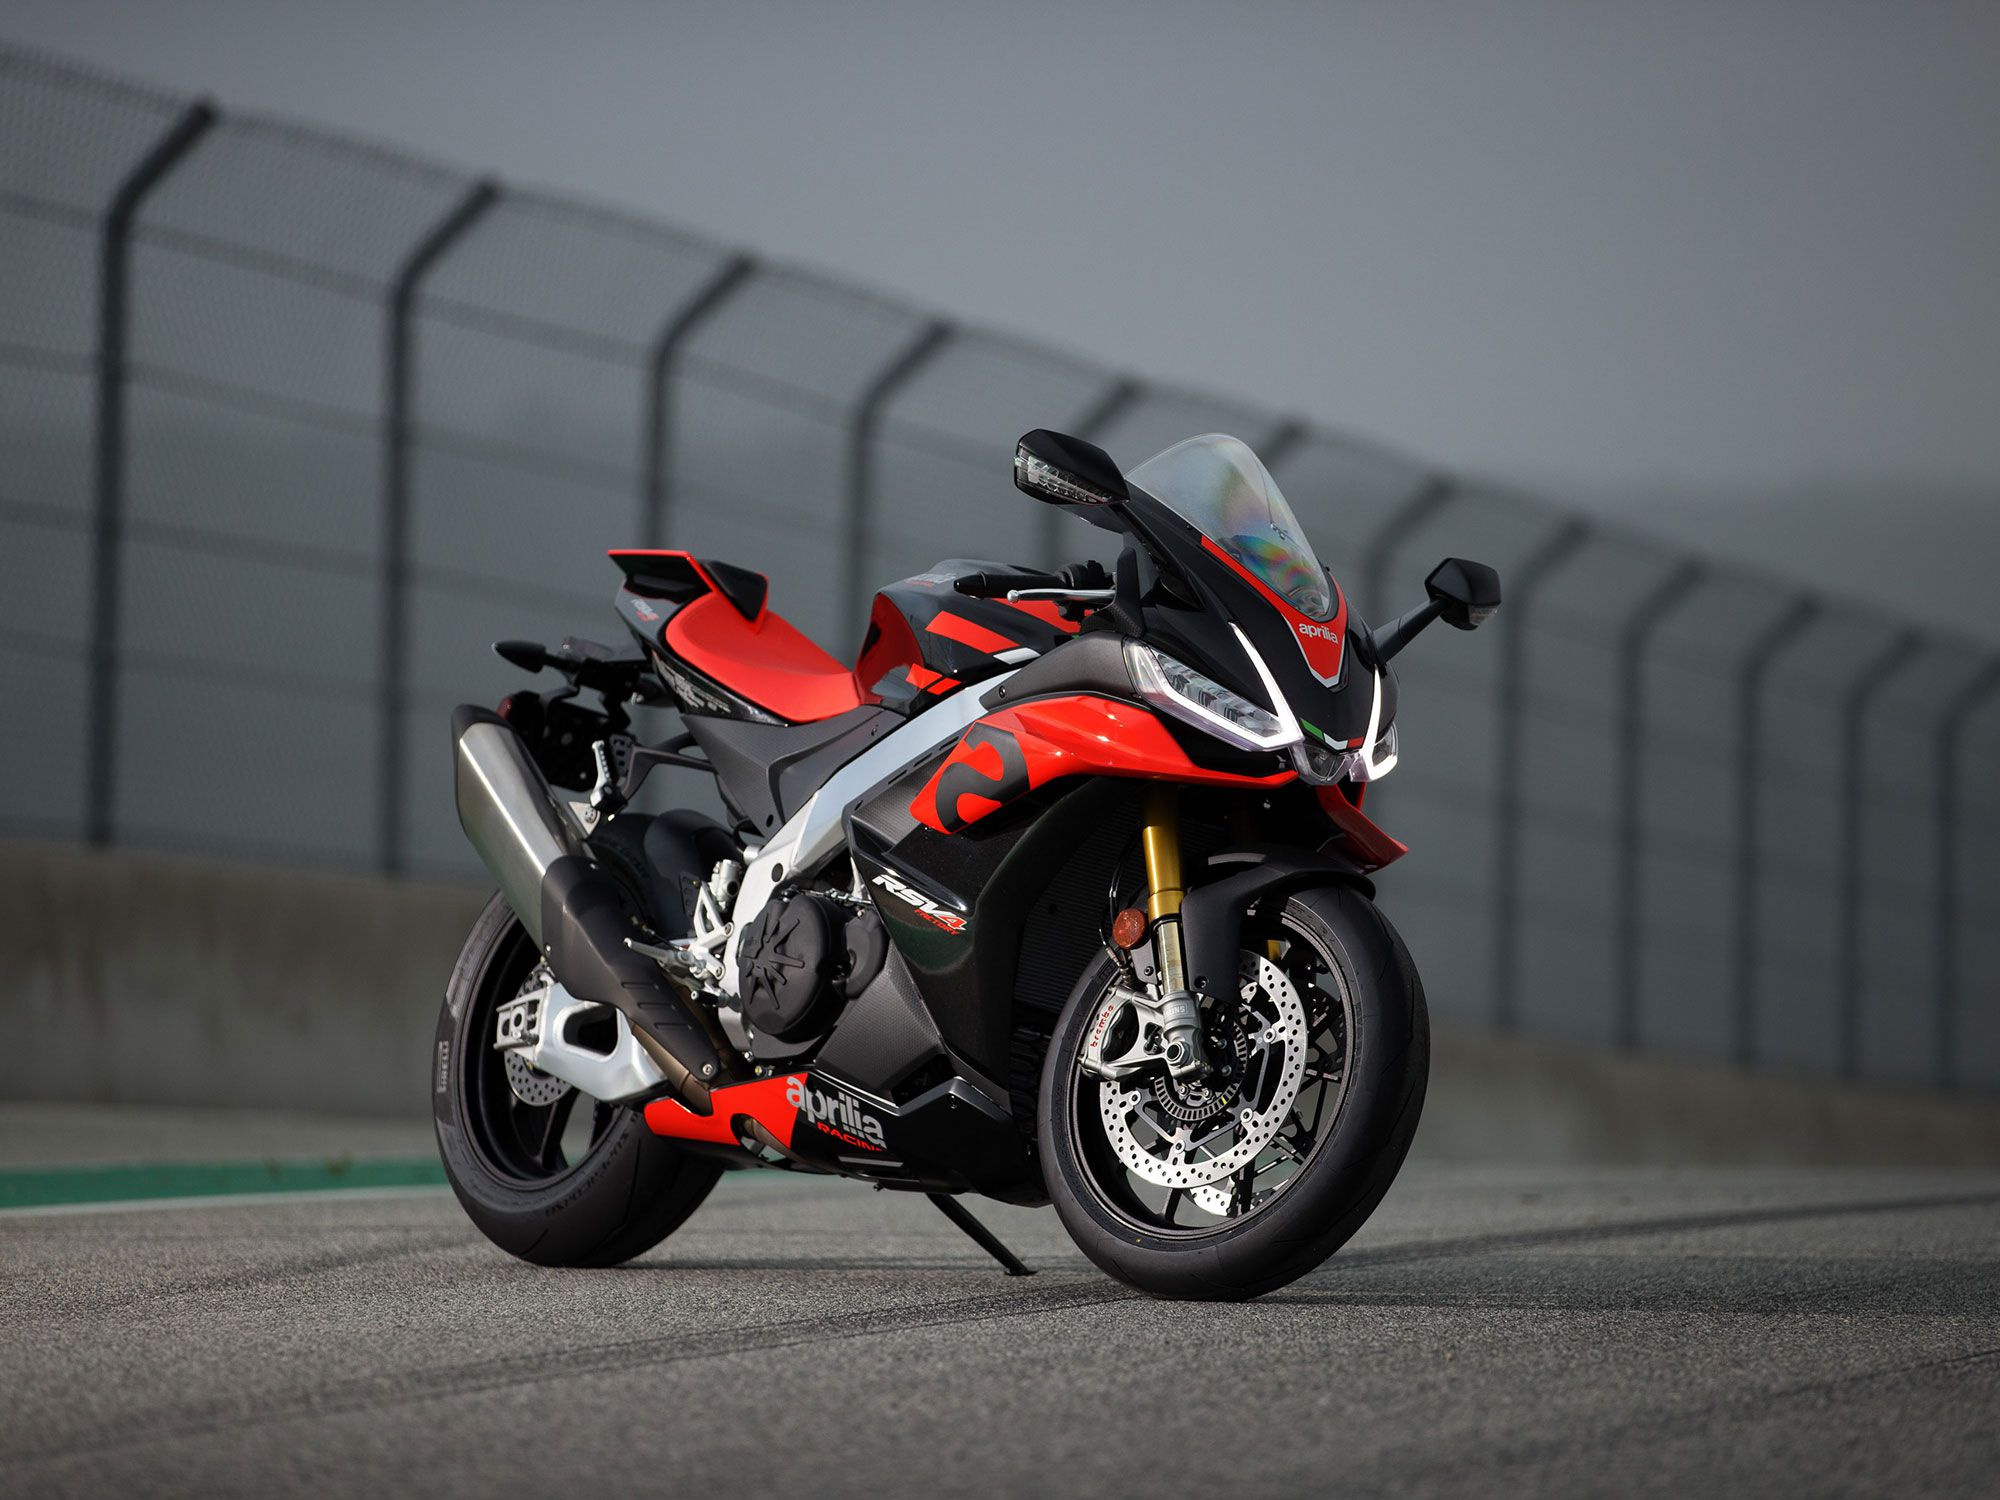 As opposed to radial platform changes, Aprilia engineers methodically hone the performance of its RSV4 Factory superbike. The ’21 model features new body panels and LED lighting.